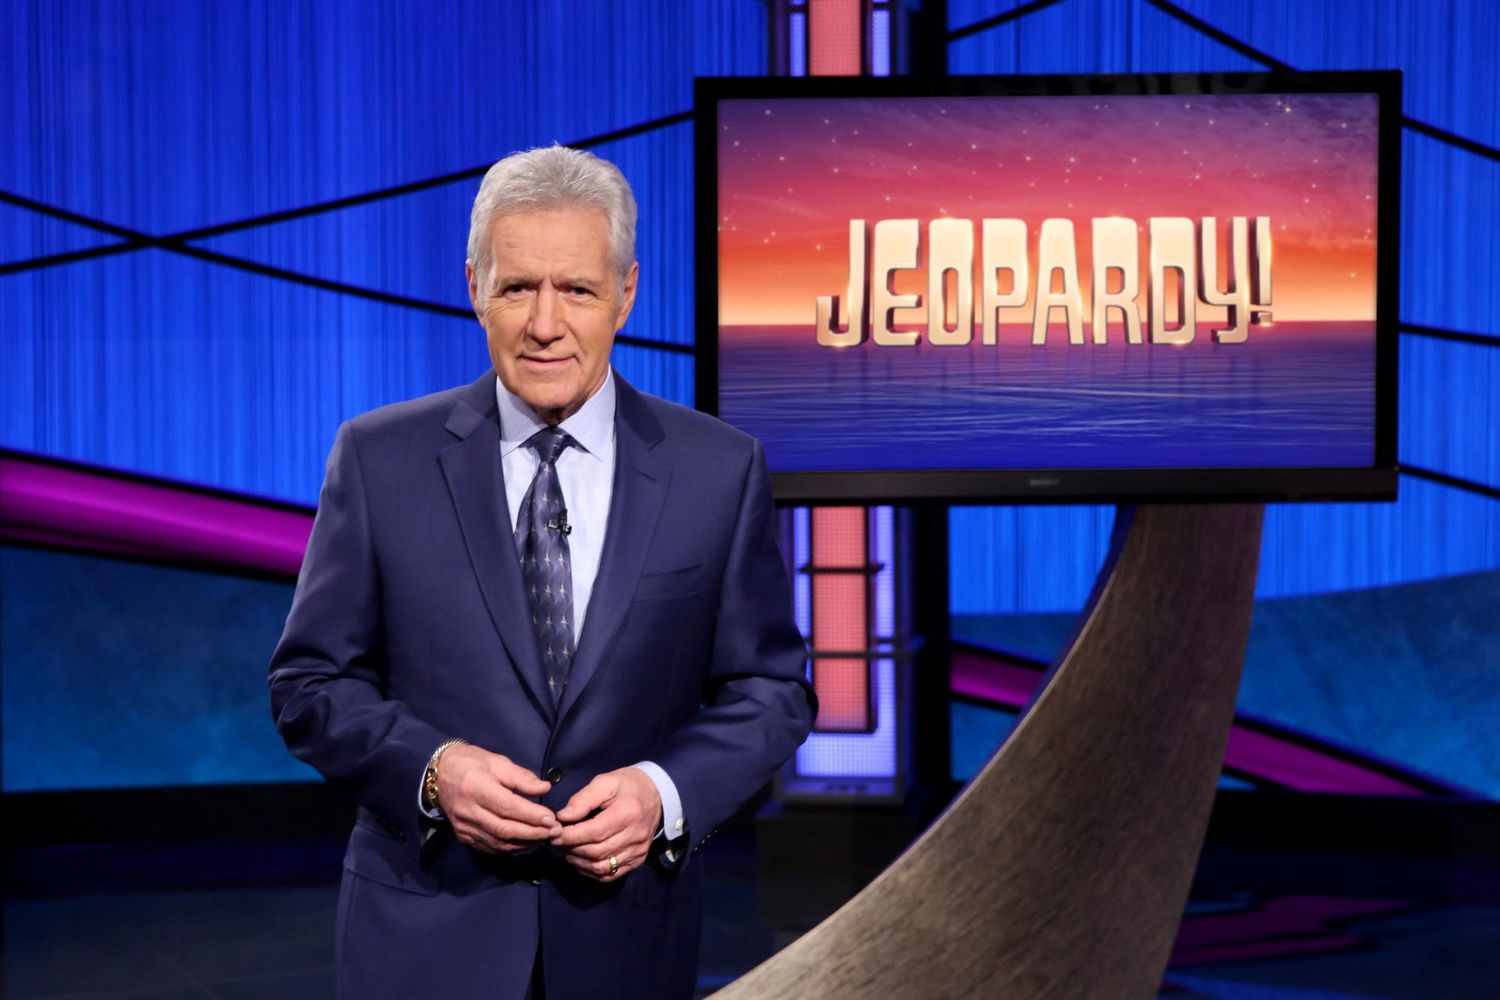 Alex Trebek Knows What To Say On His Final Jeopardy Broadcast